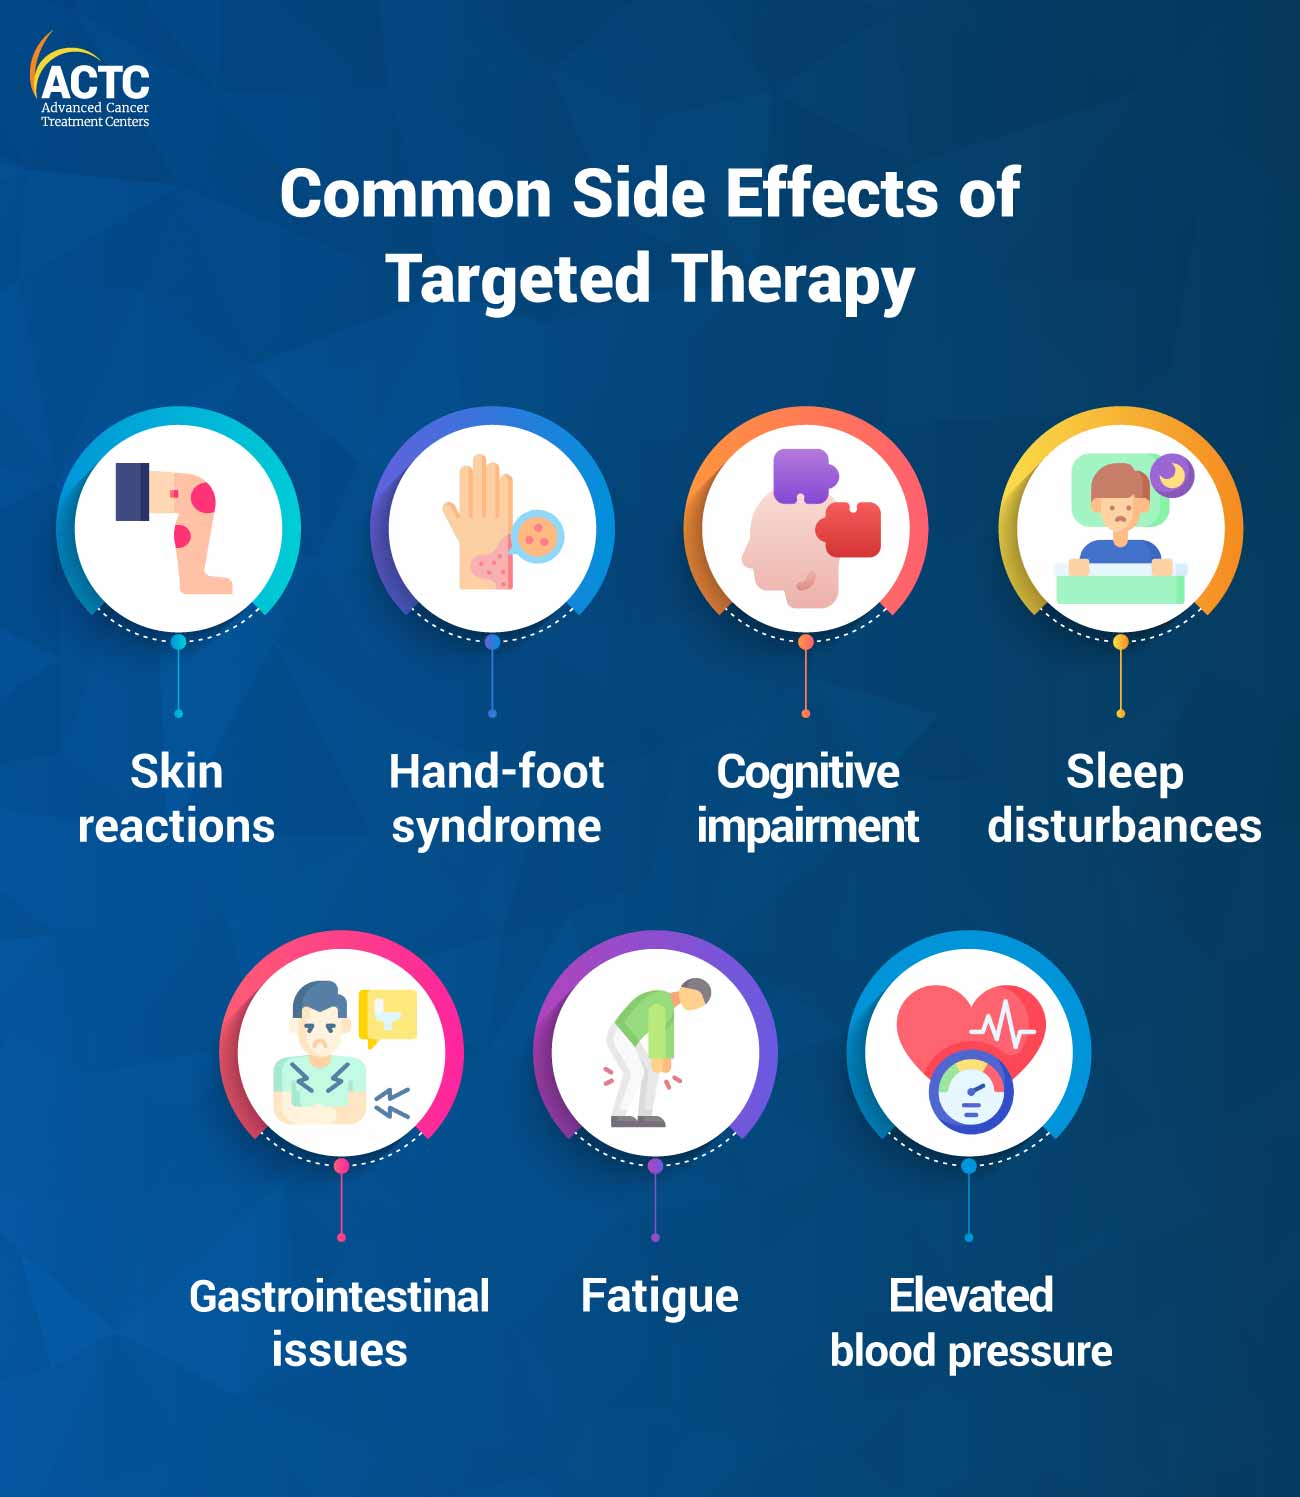 Common Side Effects of Targeted Therapy